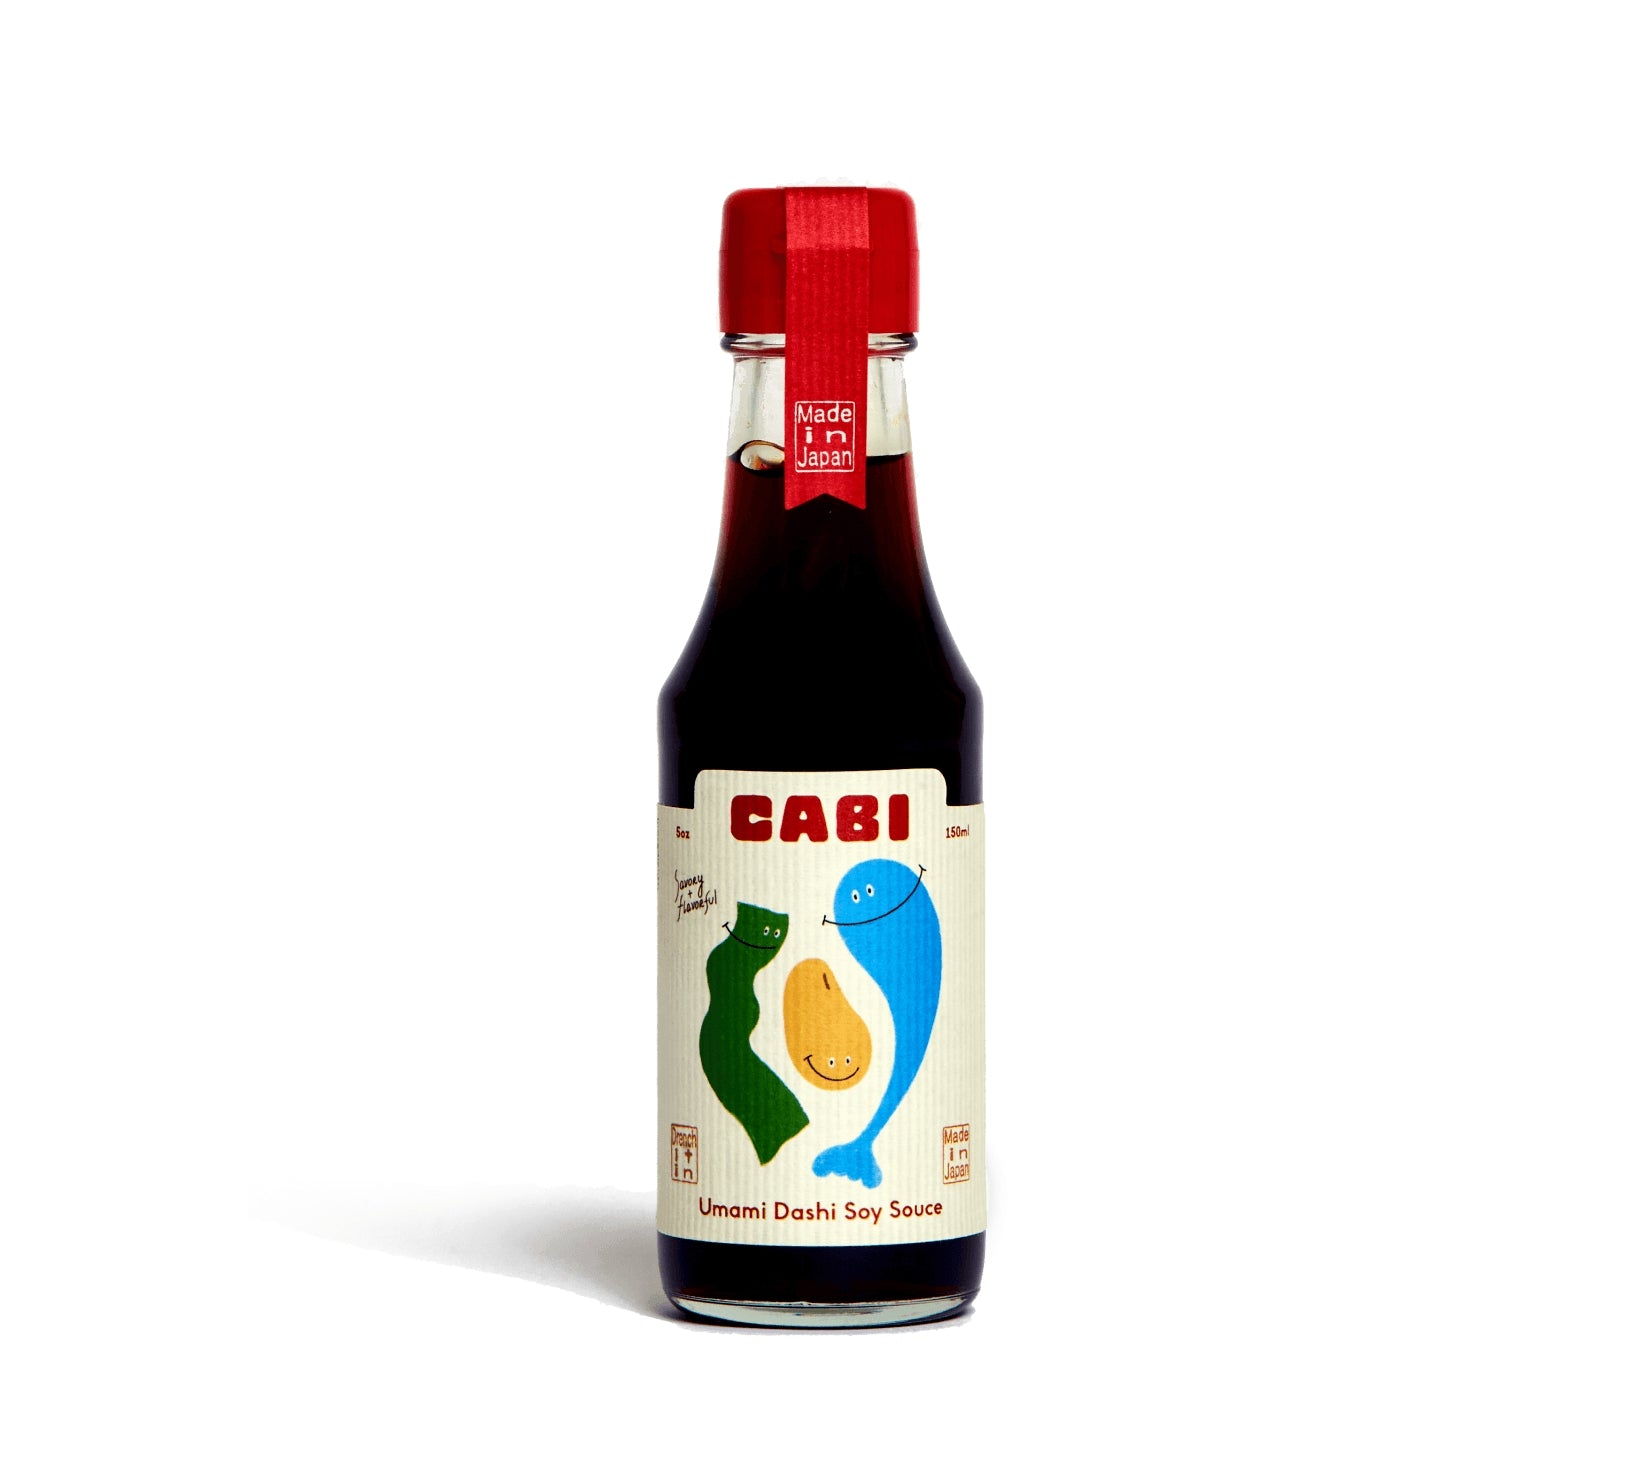 Dashi is a umami packed flavor bomb. It’s also the backbone of most Japanese dishes. With the versatile flavors of dashi and soy sauce weaved together, a heavenly savory flavor and new staple is created! All crafted in Japan.